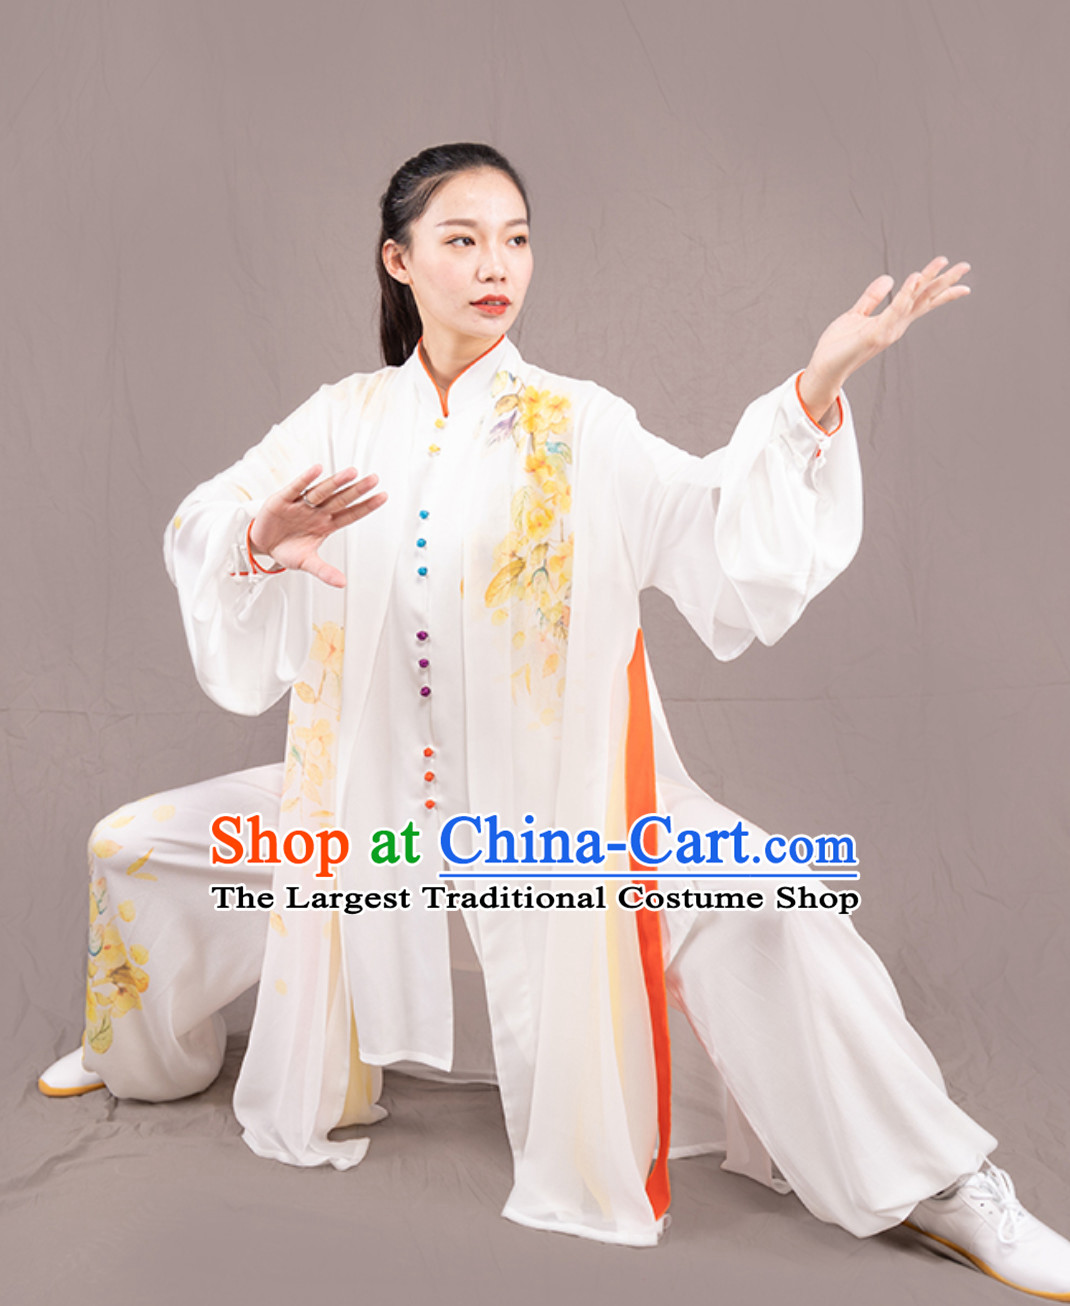 Top Chinese Traditional Competition Championship Professional Tai Chi Uniforms Taiji Kung Fu Wing Chun Kungfu Tai Ji Sword Gong Fu Master Stage Performance Suits Clothes Complete Set